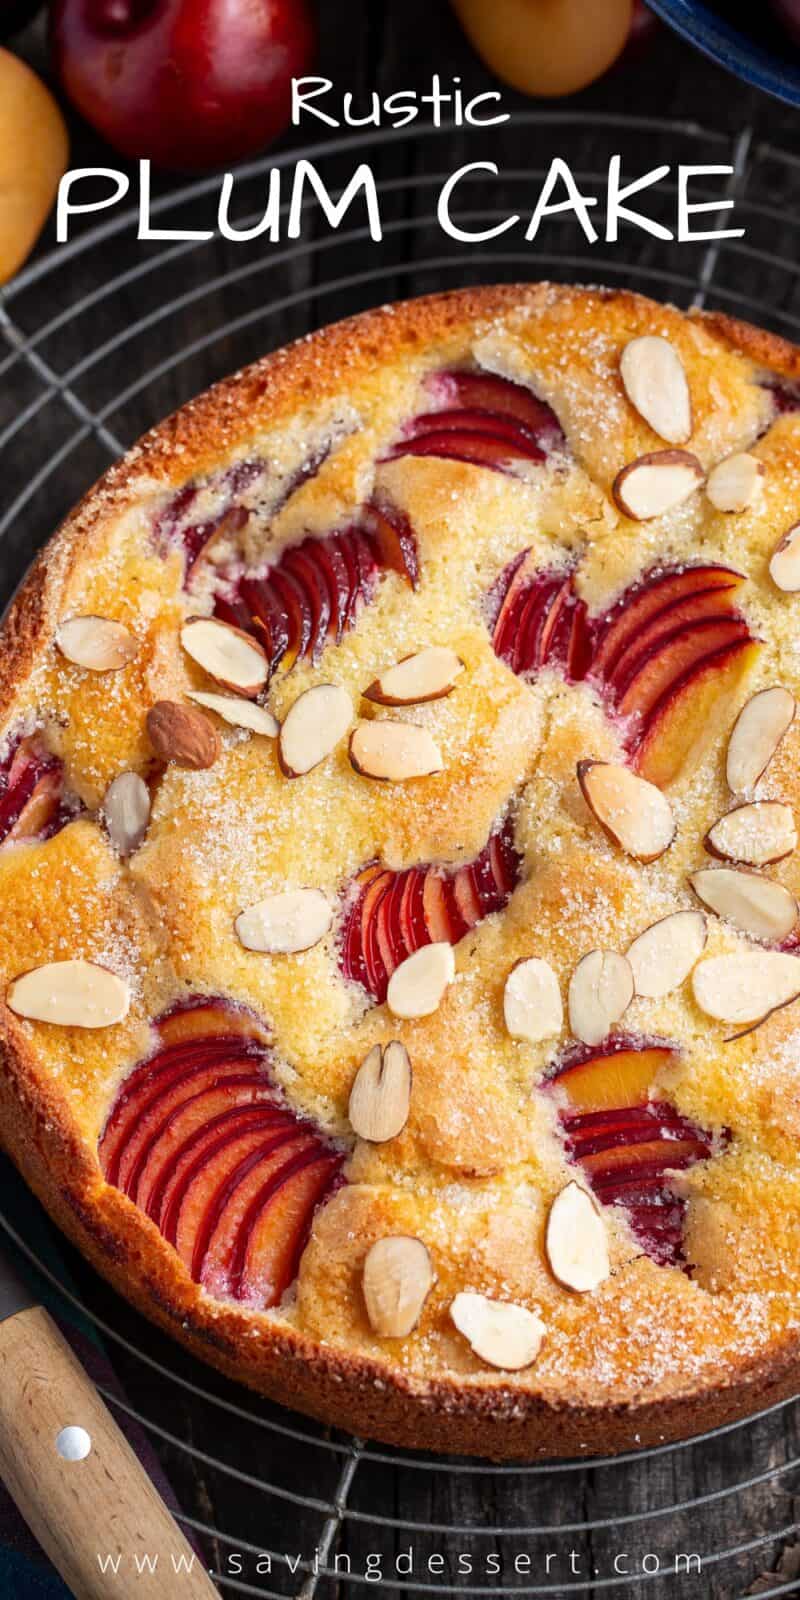 Overhead view of a simple rustic plum cake with sliced almonds on top